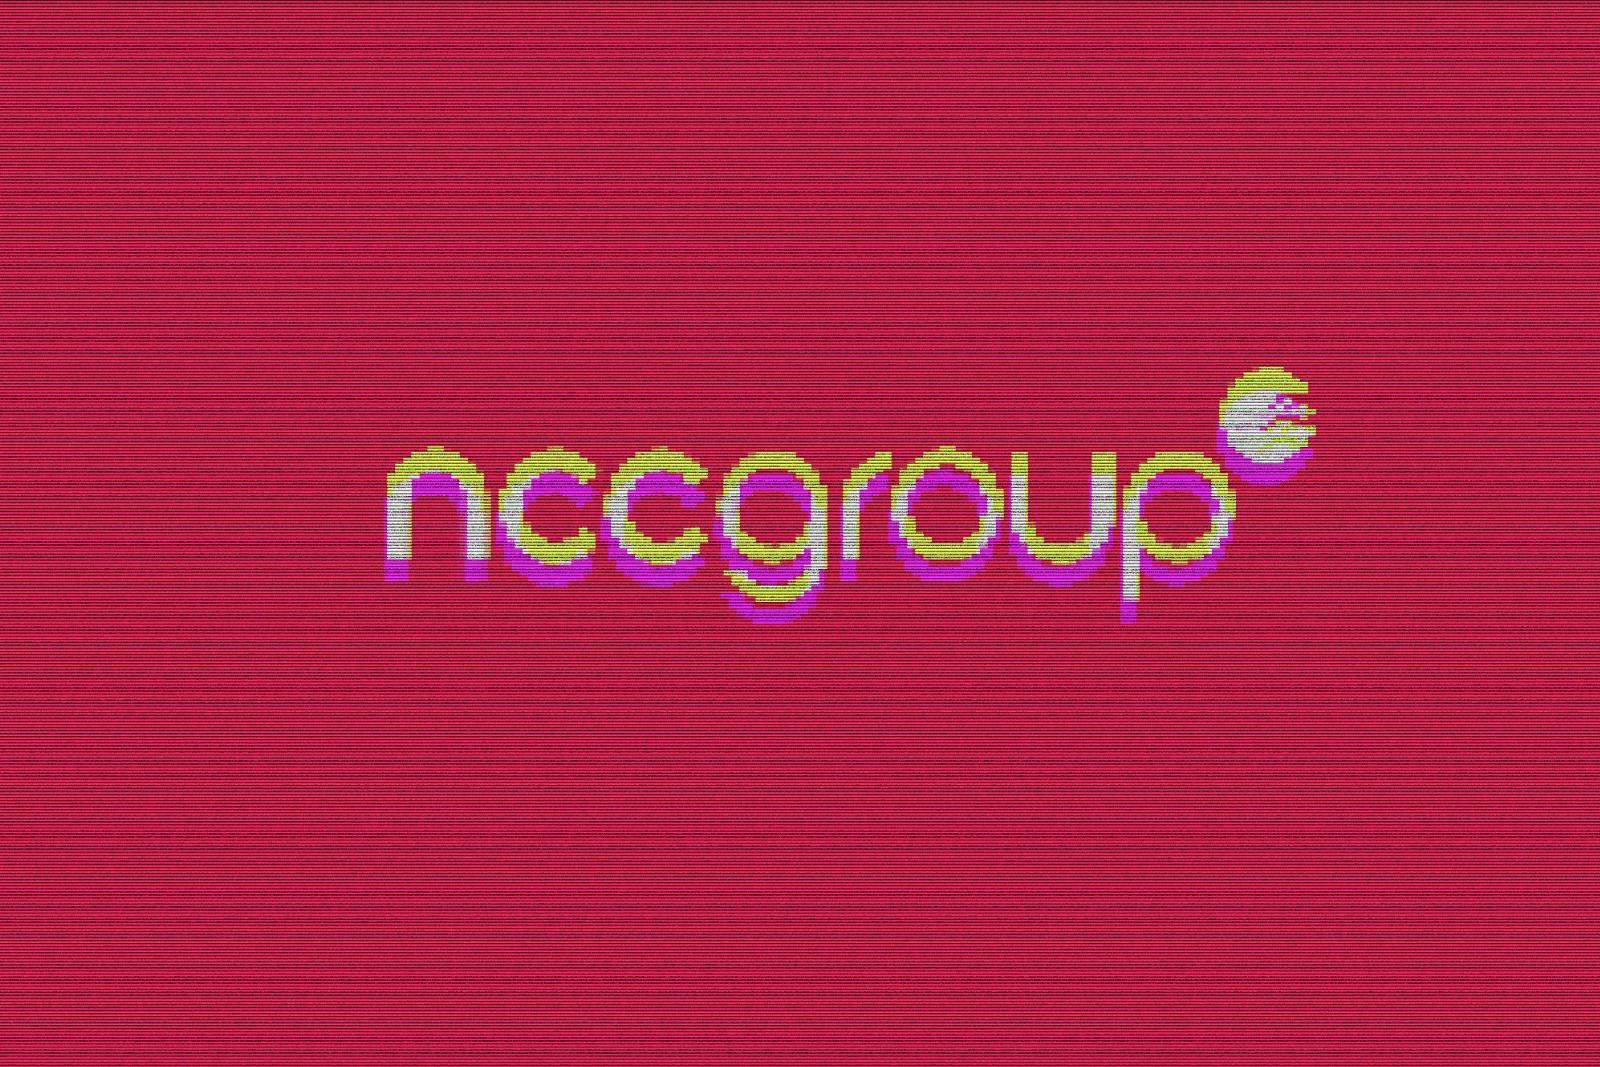 UK cybersecurity giant NCC Group is making more layoffs